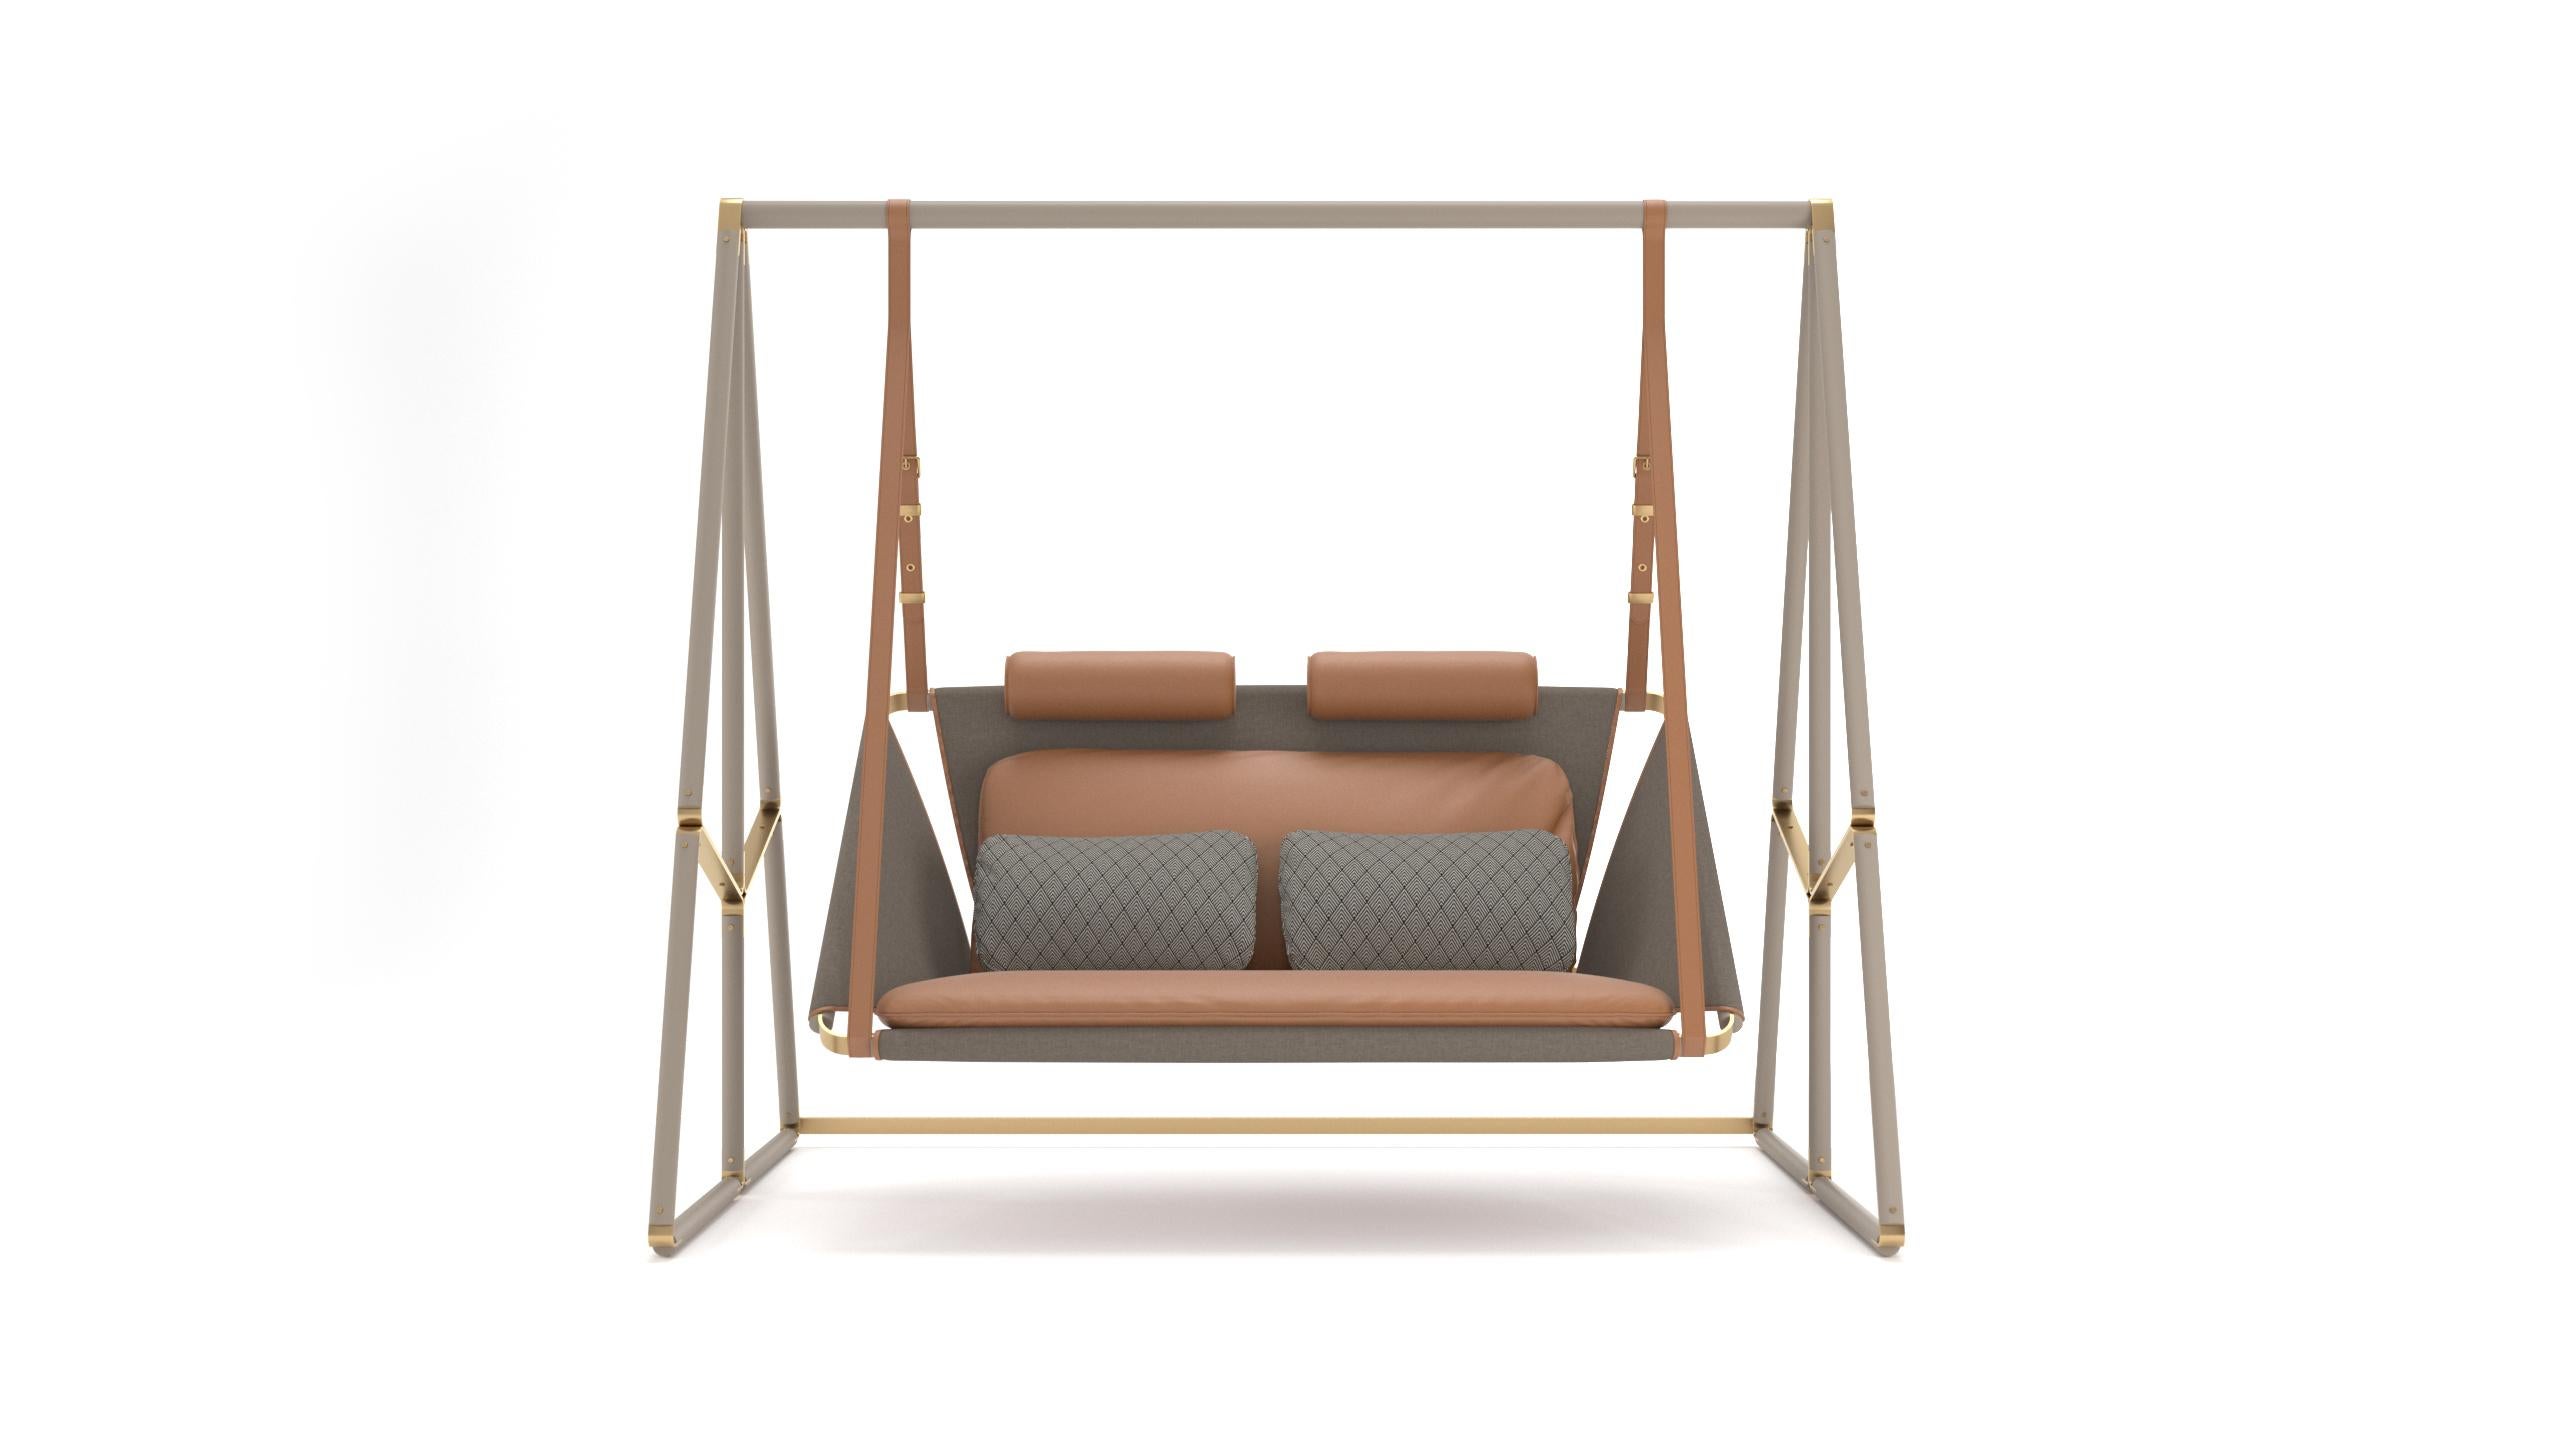 The Allure swing stands out for the combination of its outstanding materials. Plated stainless steel buckles with outdoor leather straps and premium fabrics, result on a swing with a modern design that brings the charm and elegance of the indoors to